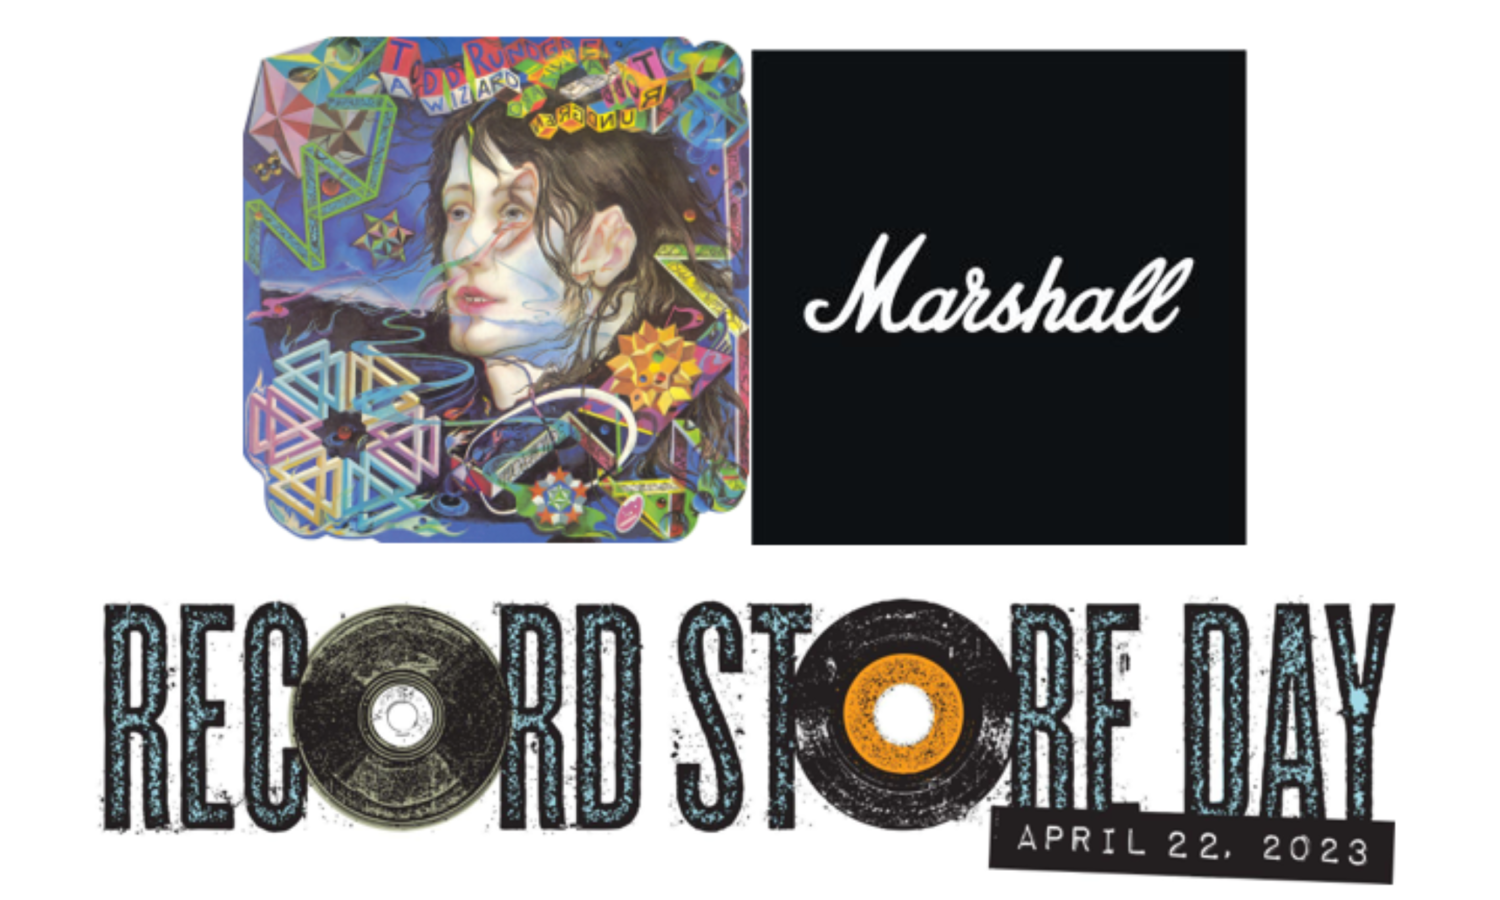 Record Store Day honors